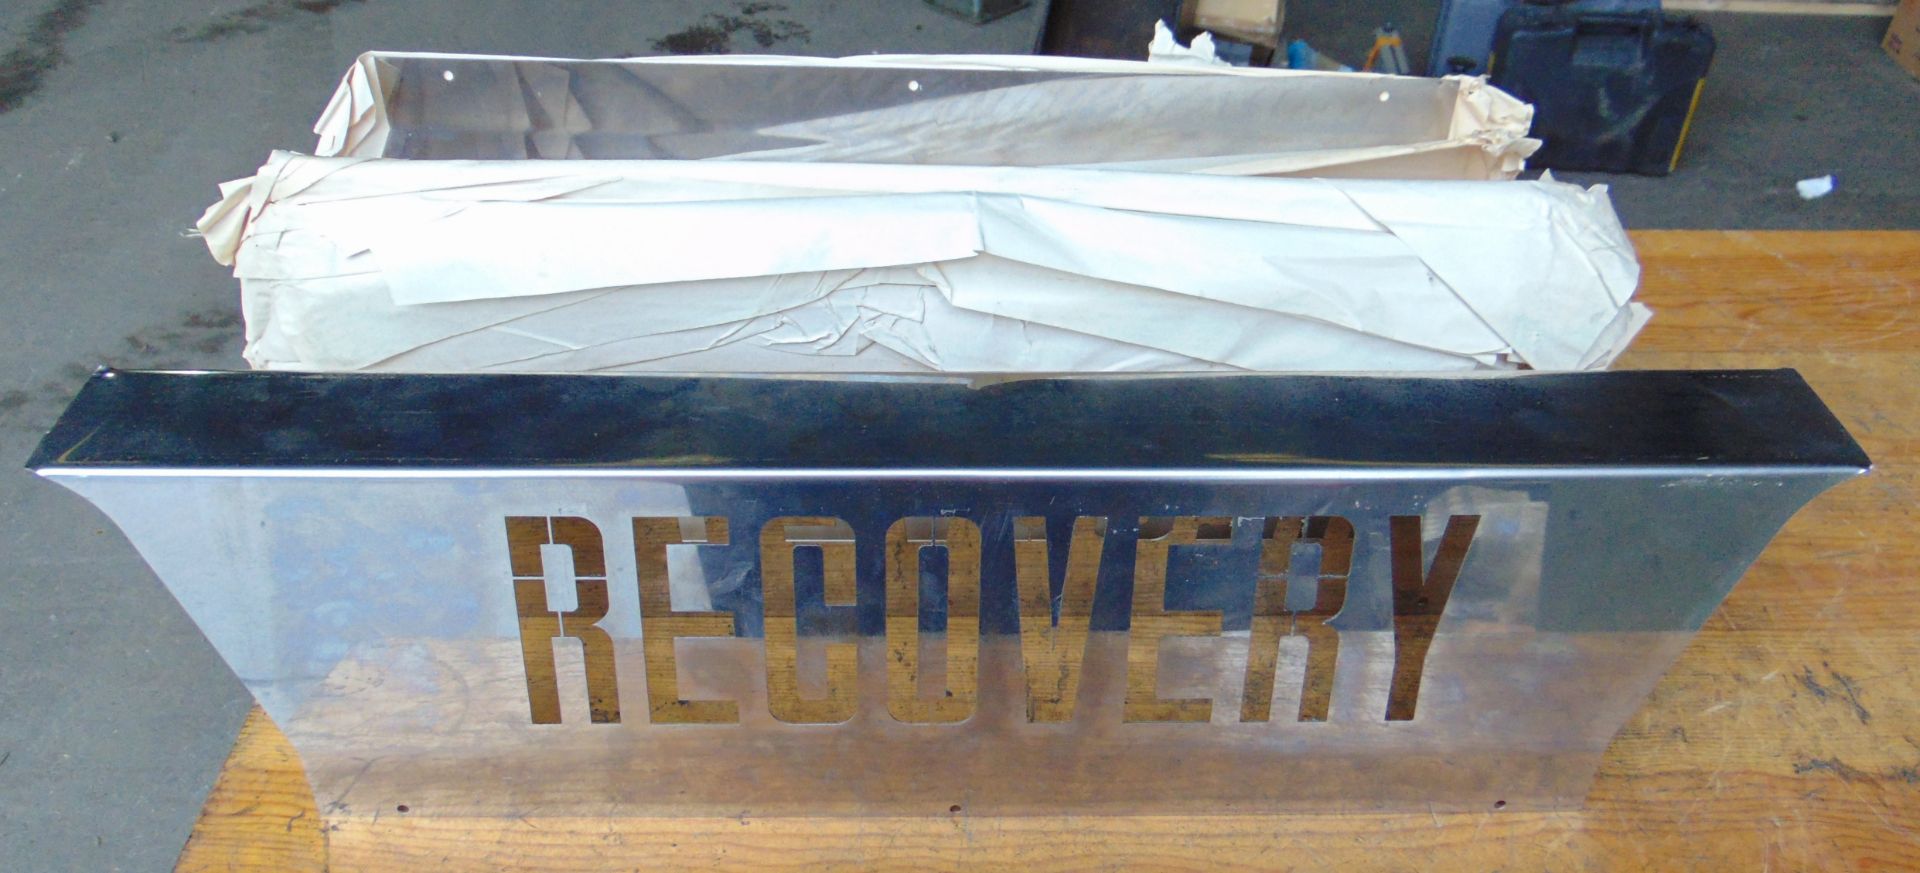 10 x Stainless Steel "RECOVERY" Signs - Image 2 of 6